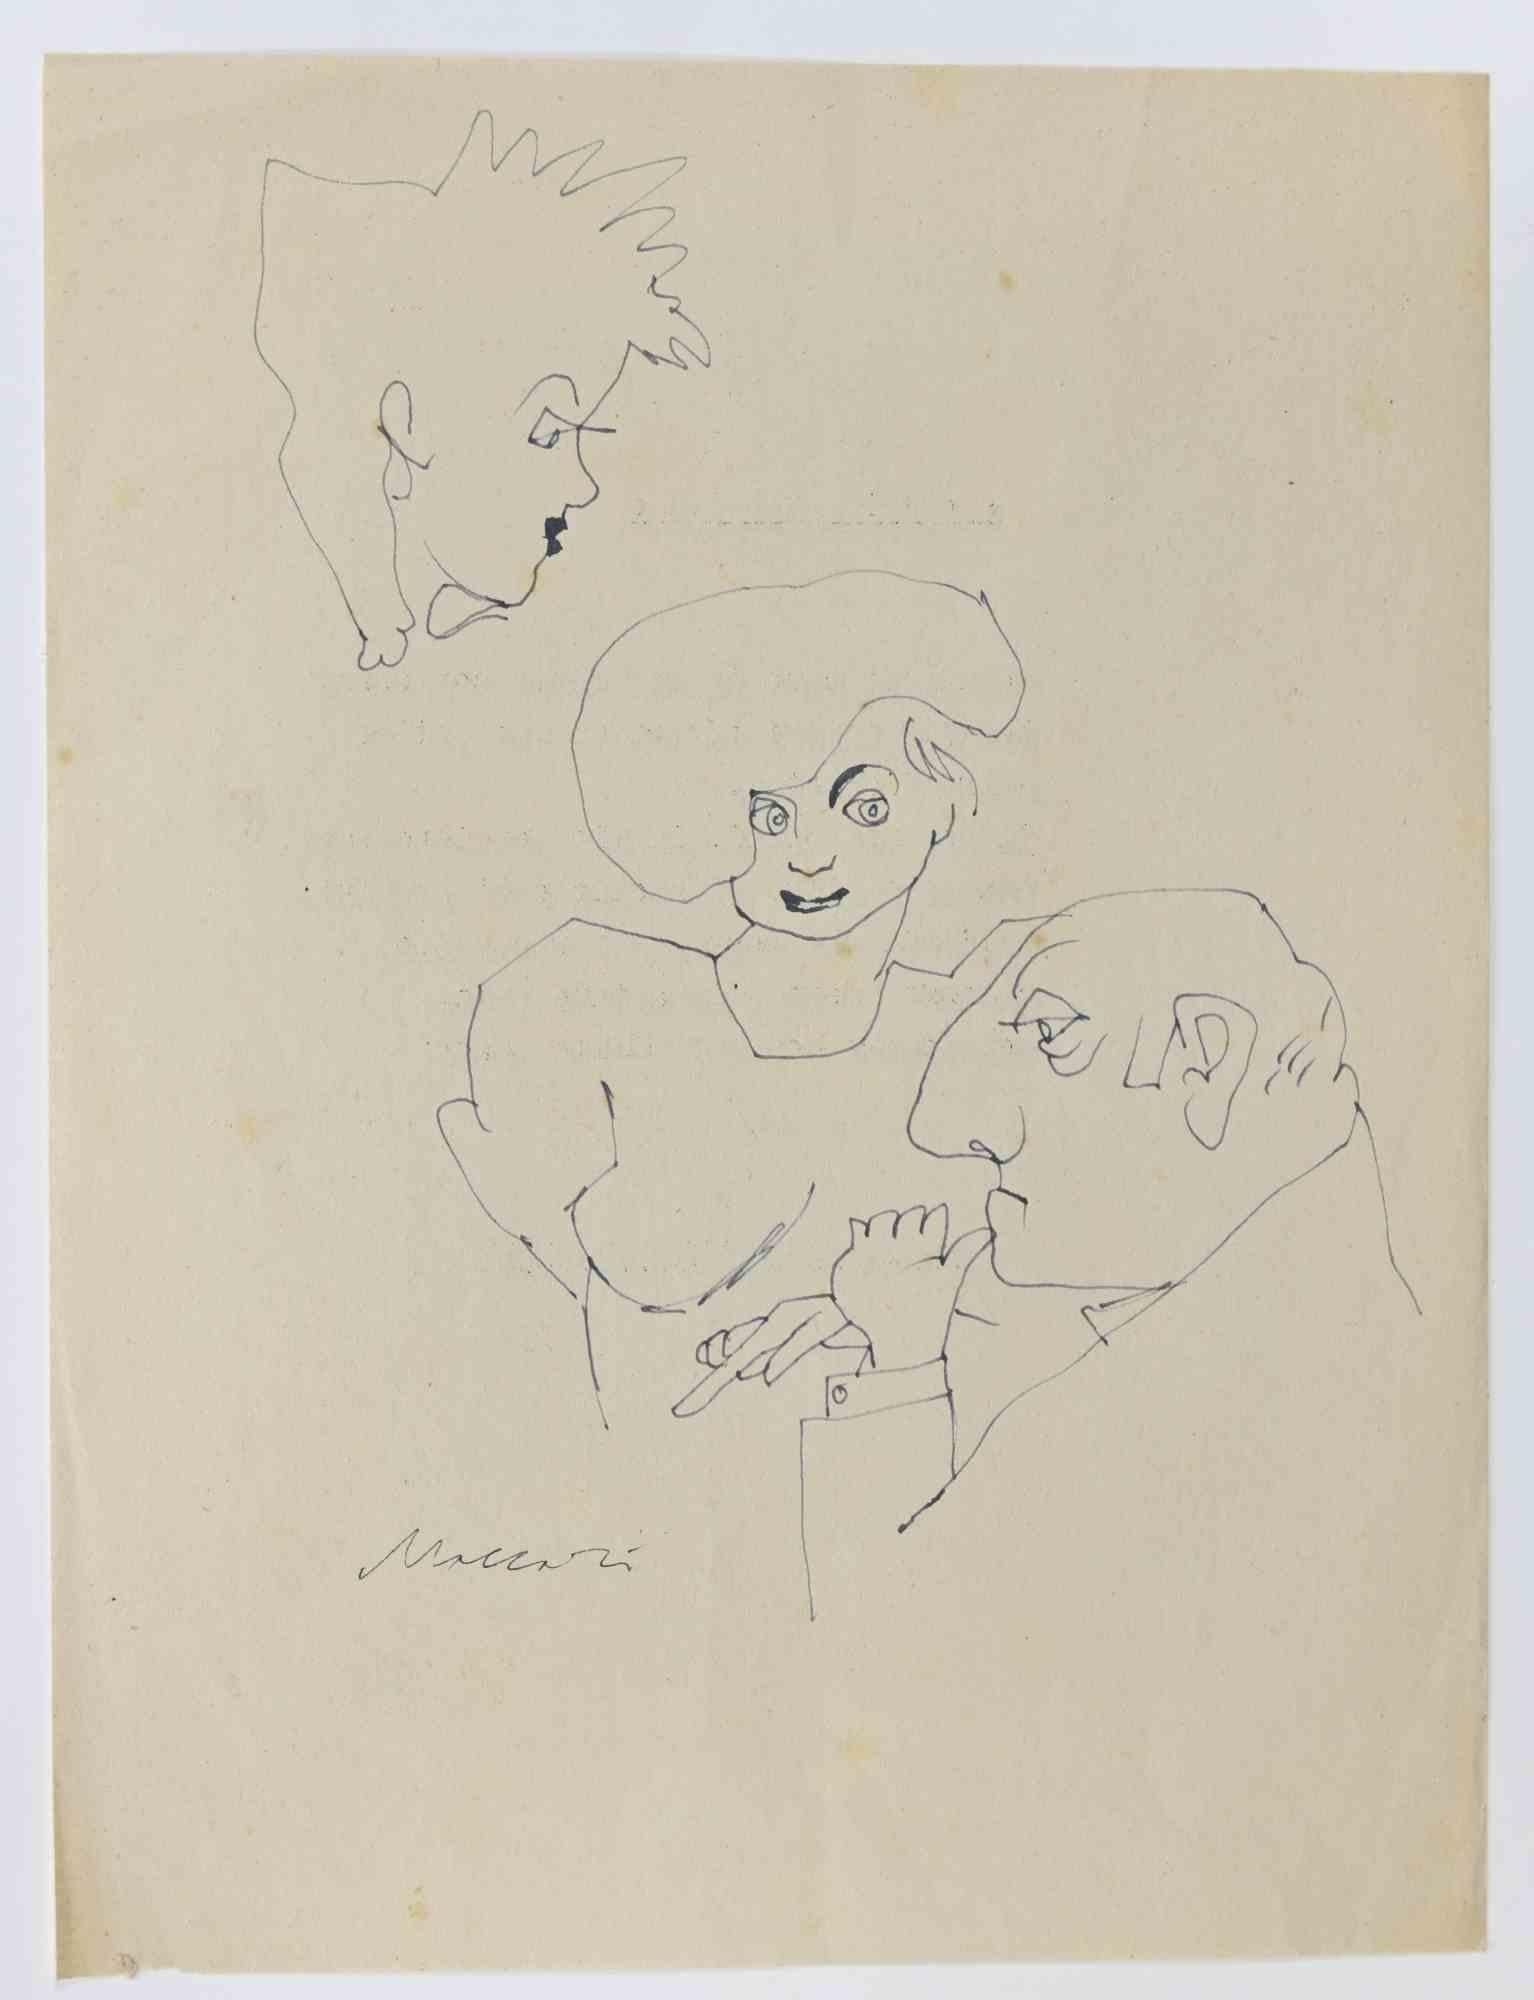 Figures is a Pen Drawing realized by Mino Maccari  (1924-1989) in the 1960s.

Hand-signed on the lower.

Good condition.

Mino Maccari (Siena, 1924-Rome, June 16, 1989) was an Italian writer, painter, engraver and journalist, winner of the